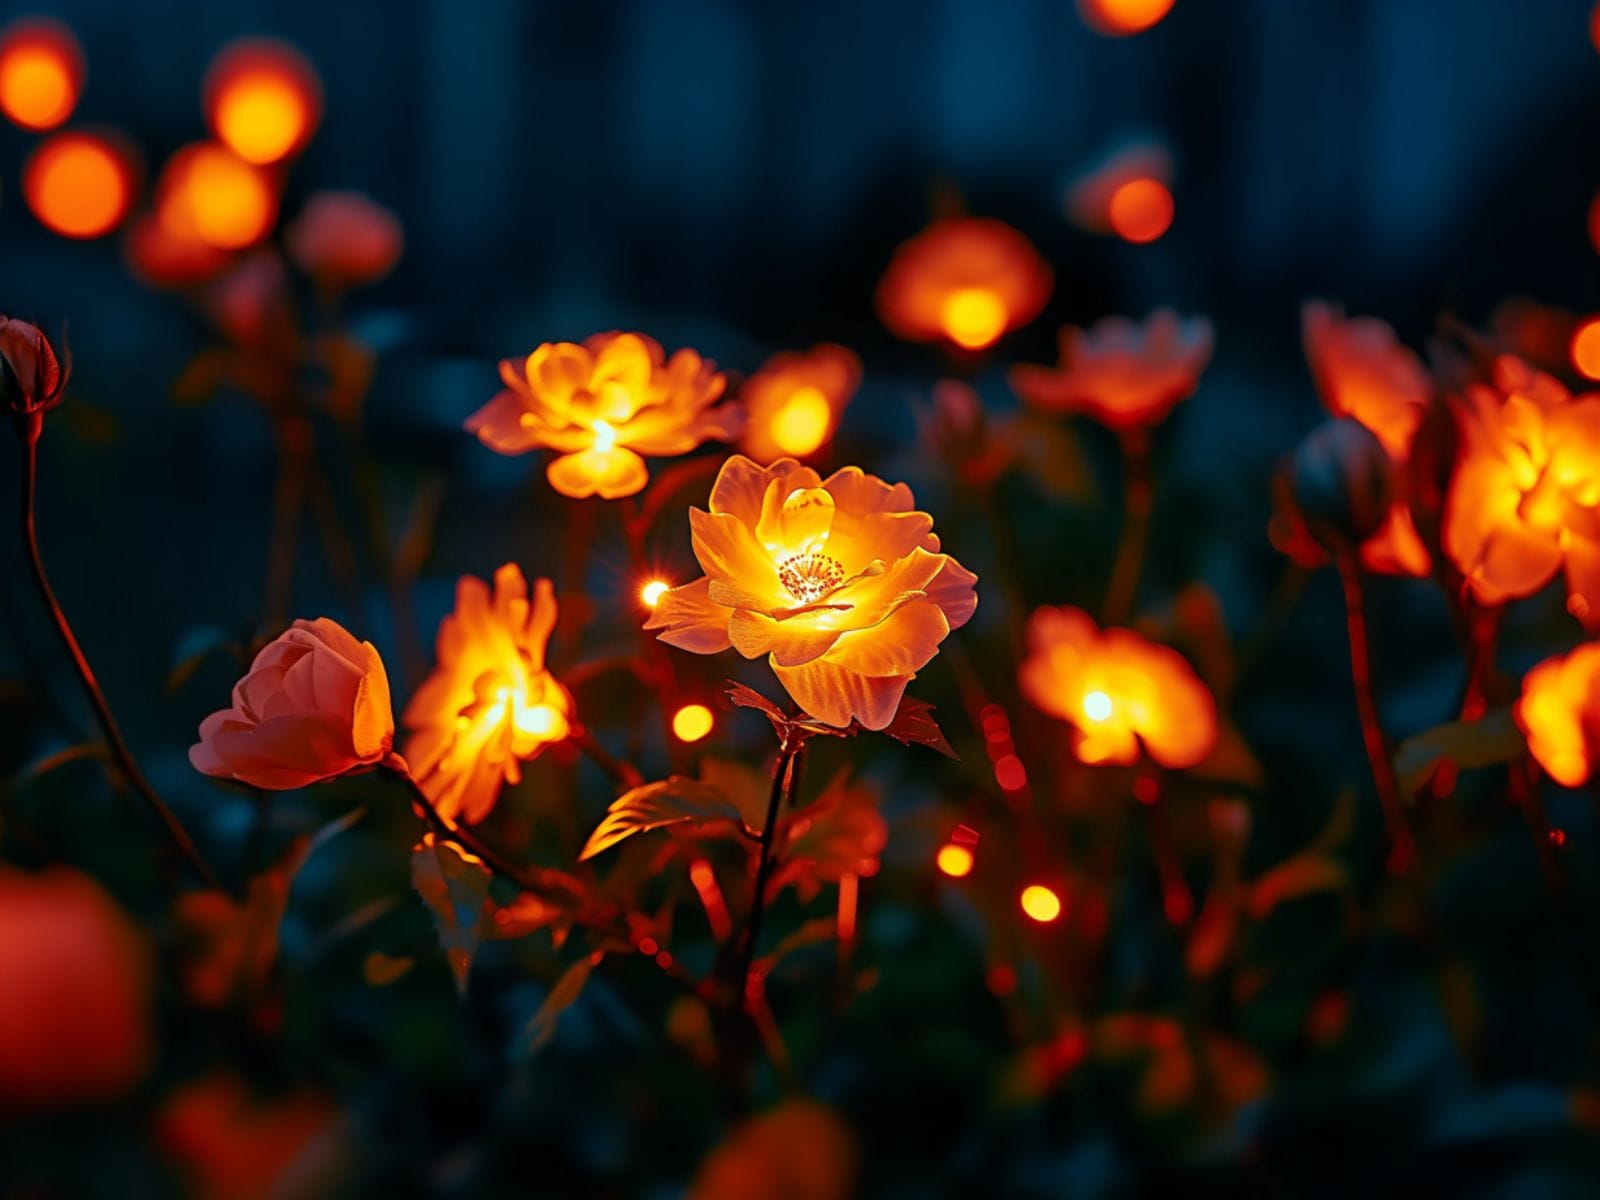 LED flower lights installed in a garden for illumination after sunset